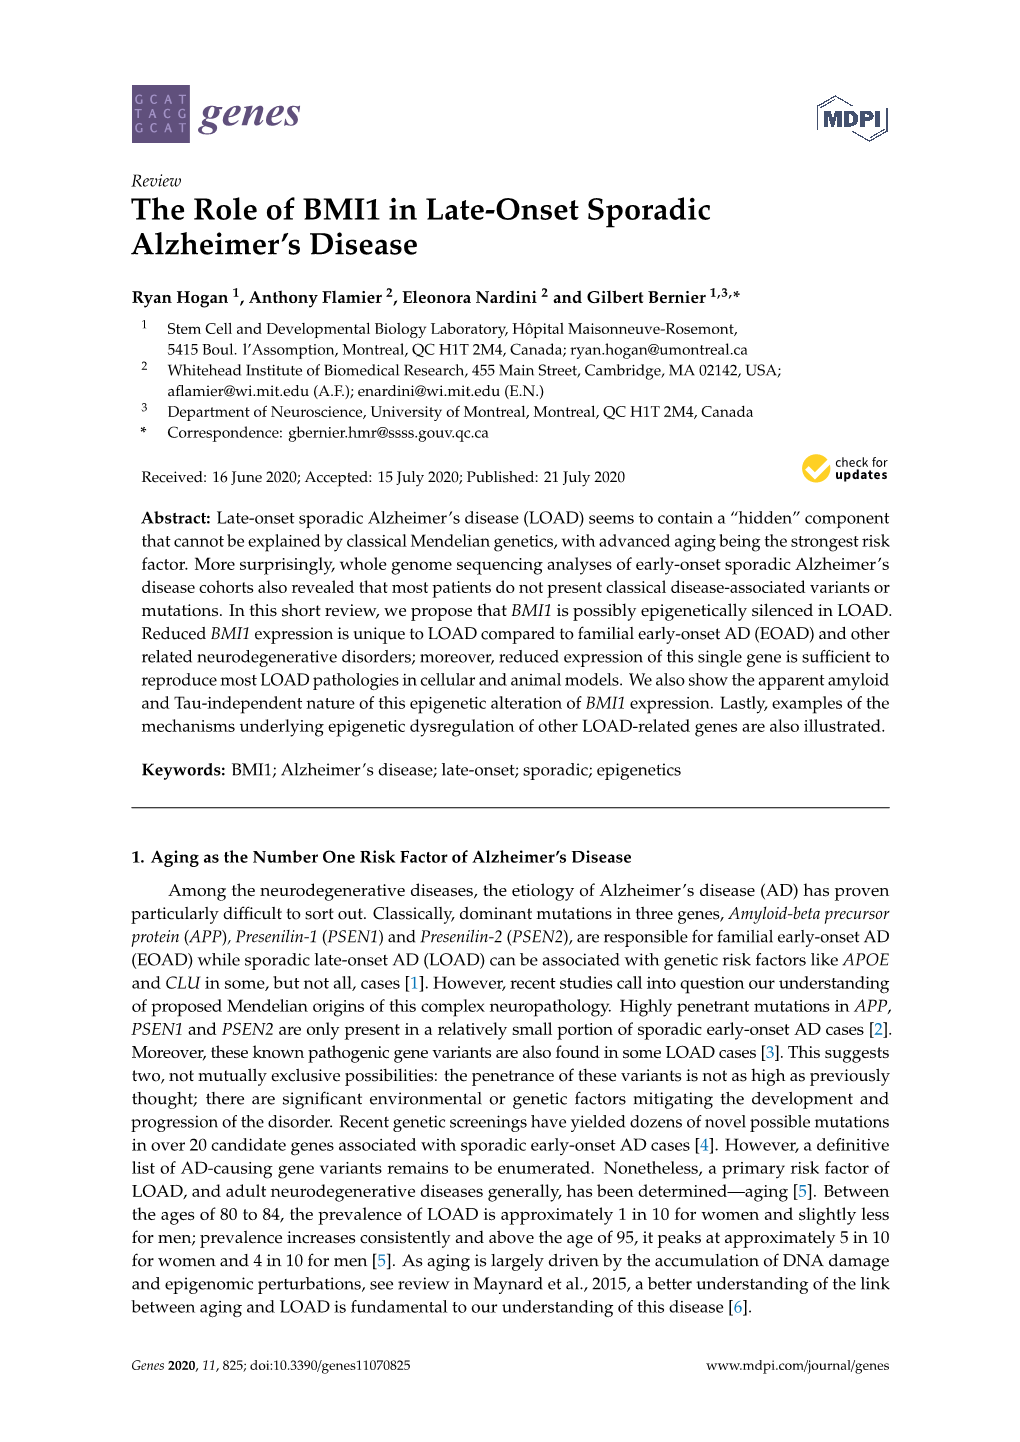 The Role of BMI1 in Late-Onset Sporadic Alzheimer's Disease